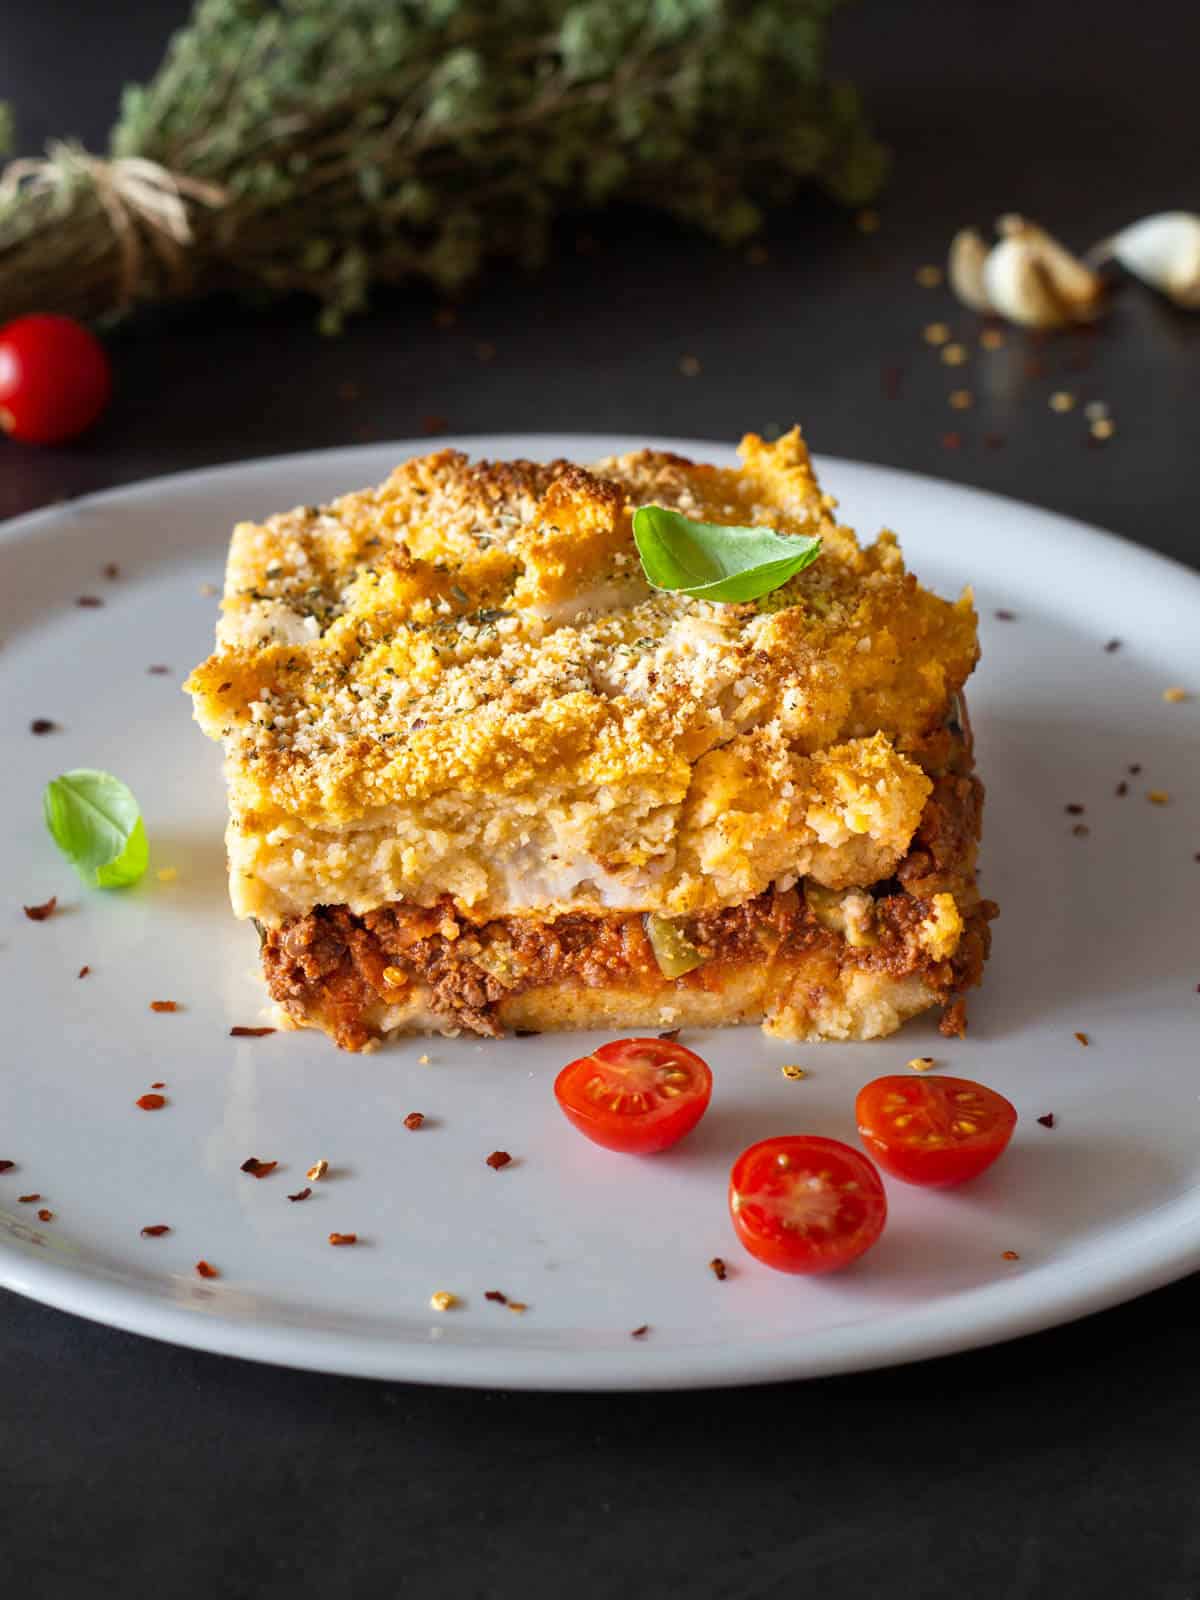 Vegan Polenta Recipe with Tofu Ragout a must-try while you eat in Italy